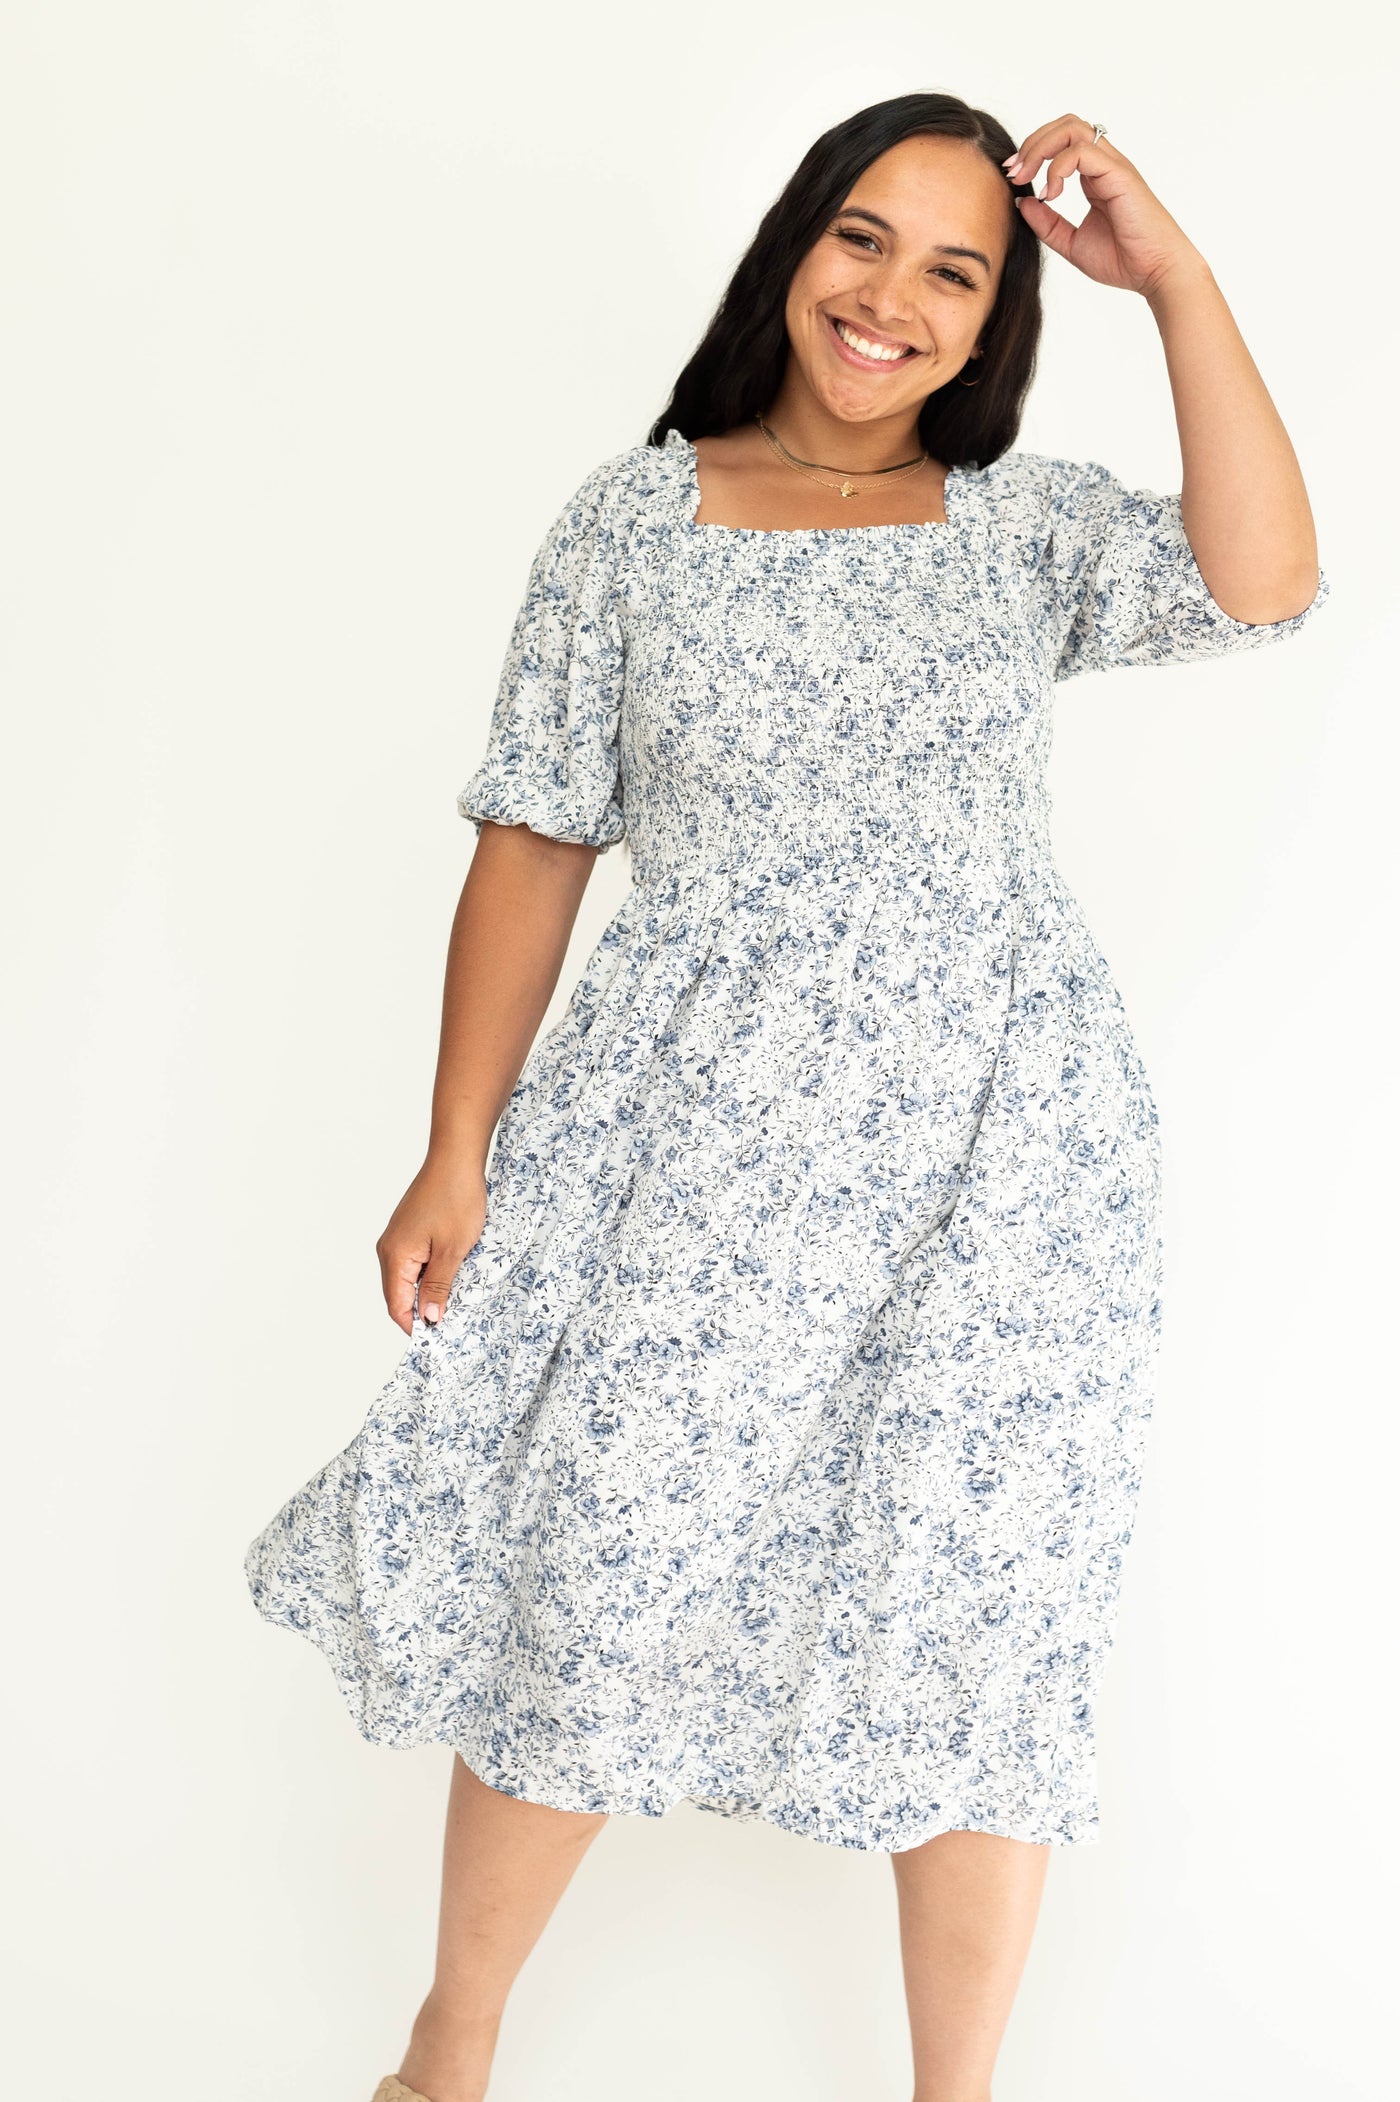 Plus size short sleeve blue floral dress with smocked bodice.